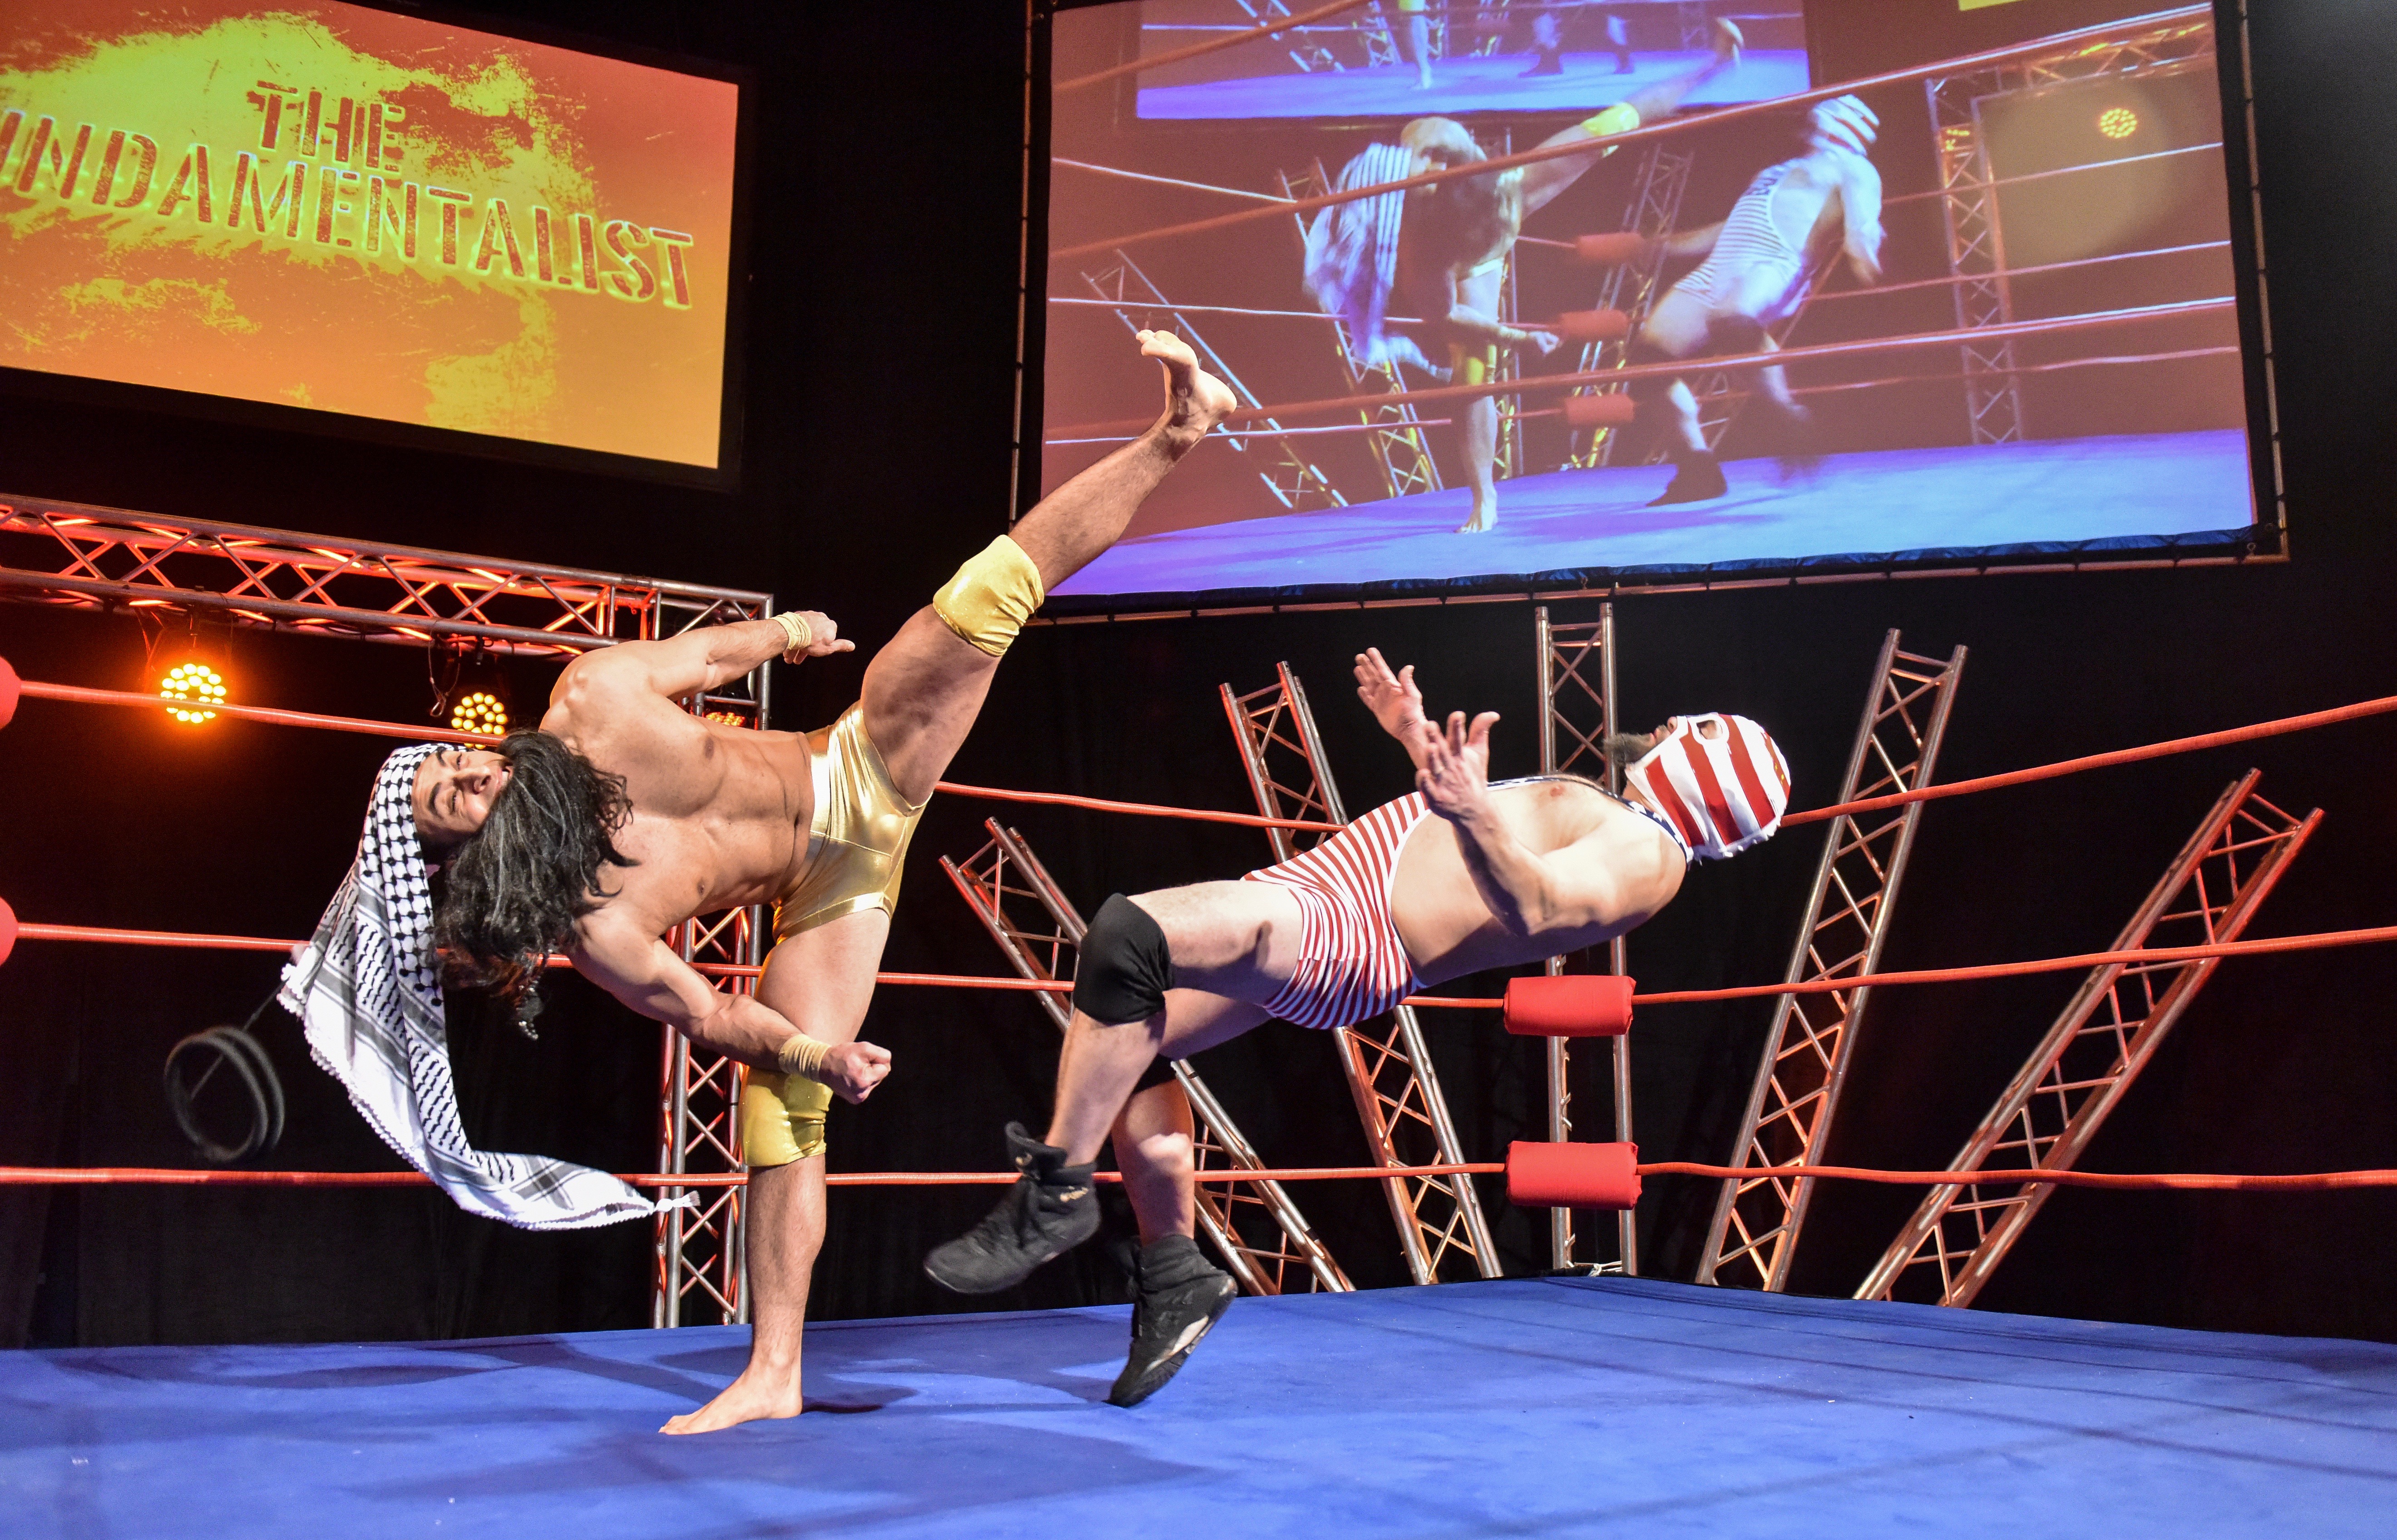 The Fundamentalist takes out Old Glory (Jared Bajoras) with his 'sleeper cell kick.'